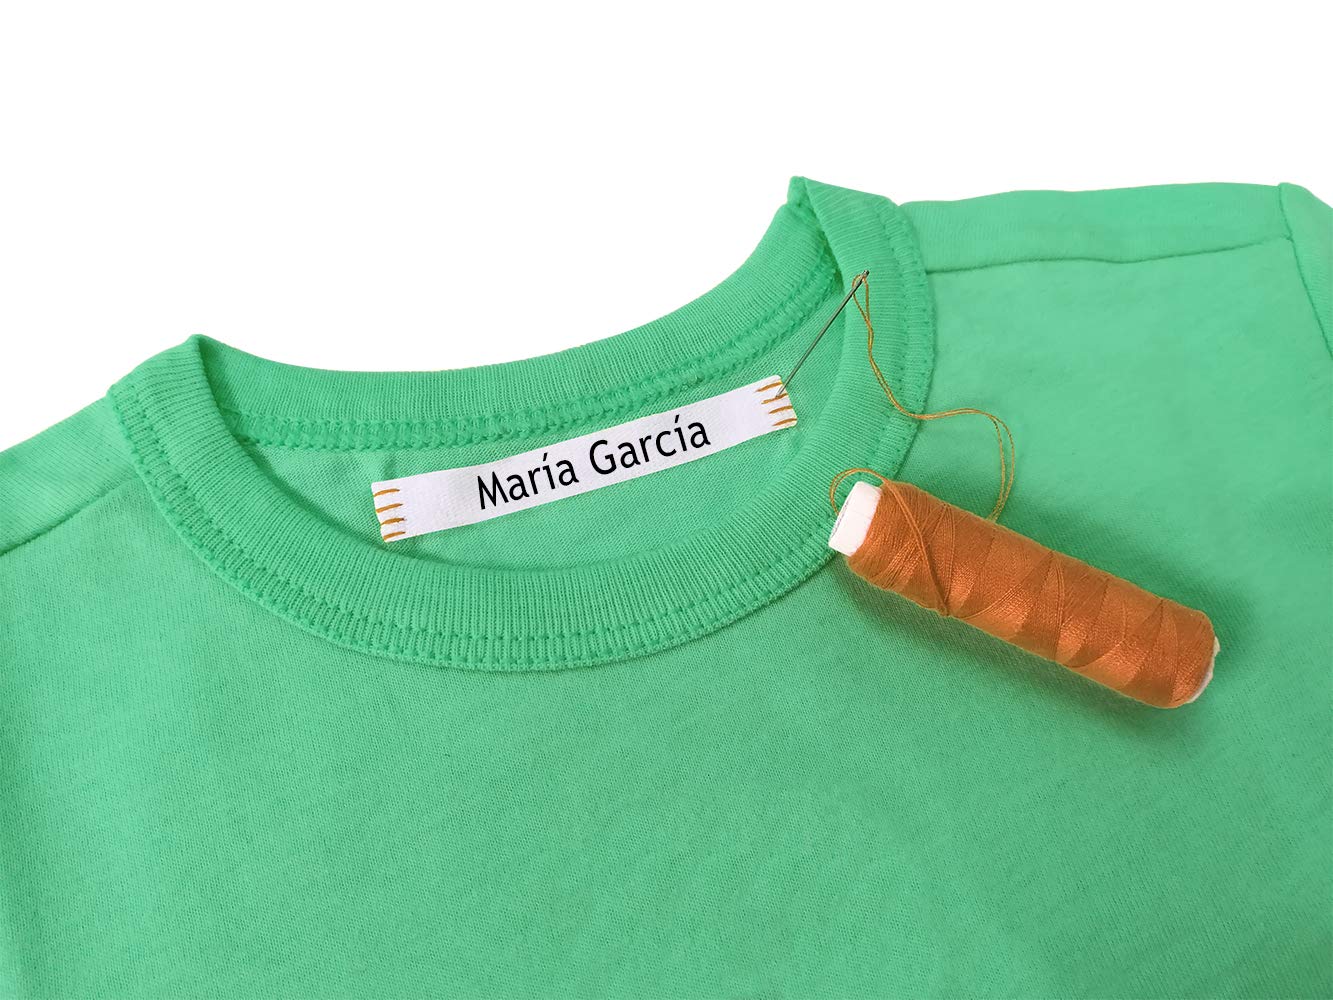 100 Personalized Labels to Mark Clothes. Sewing Tape in Clothes. Gentle  with Your Kids Skin, for Children's School Uniform/Clothing Labels for Kids,  Baby and Children. Send Text in Gift MESAGE